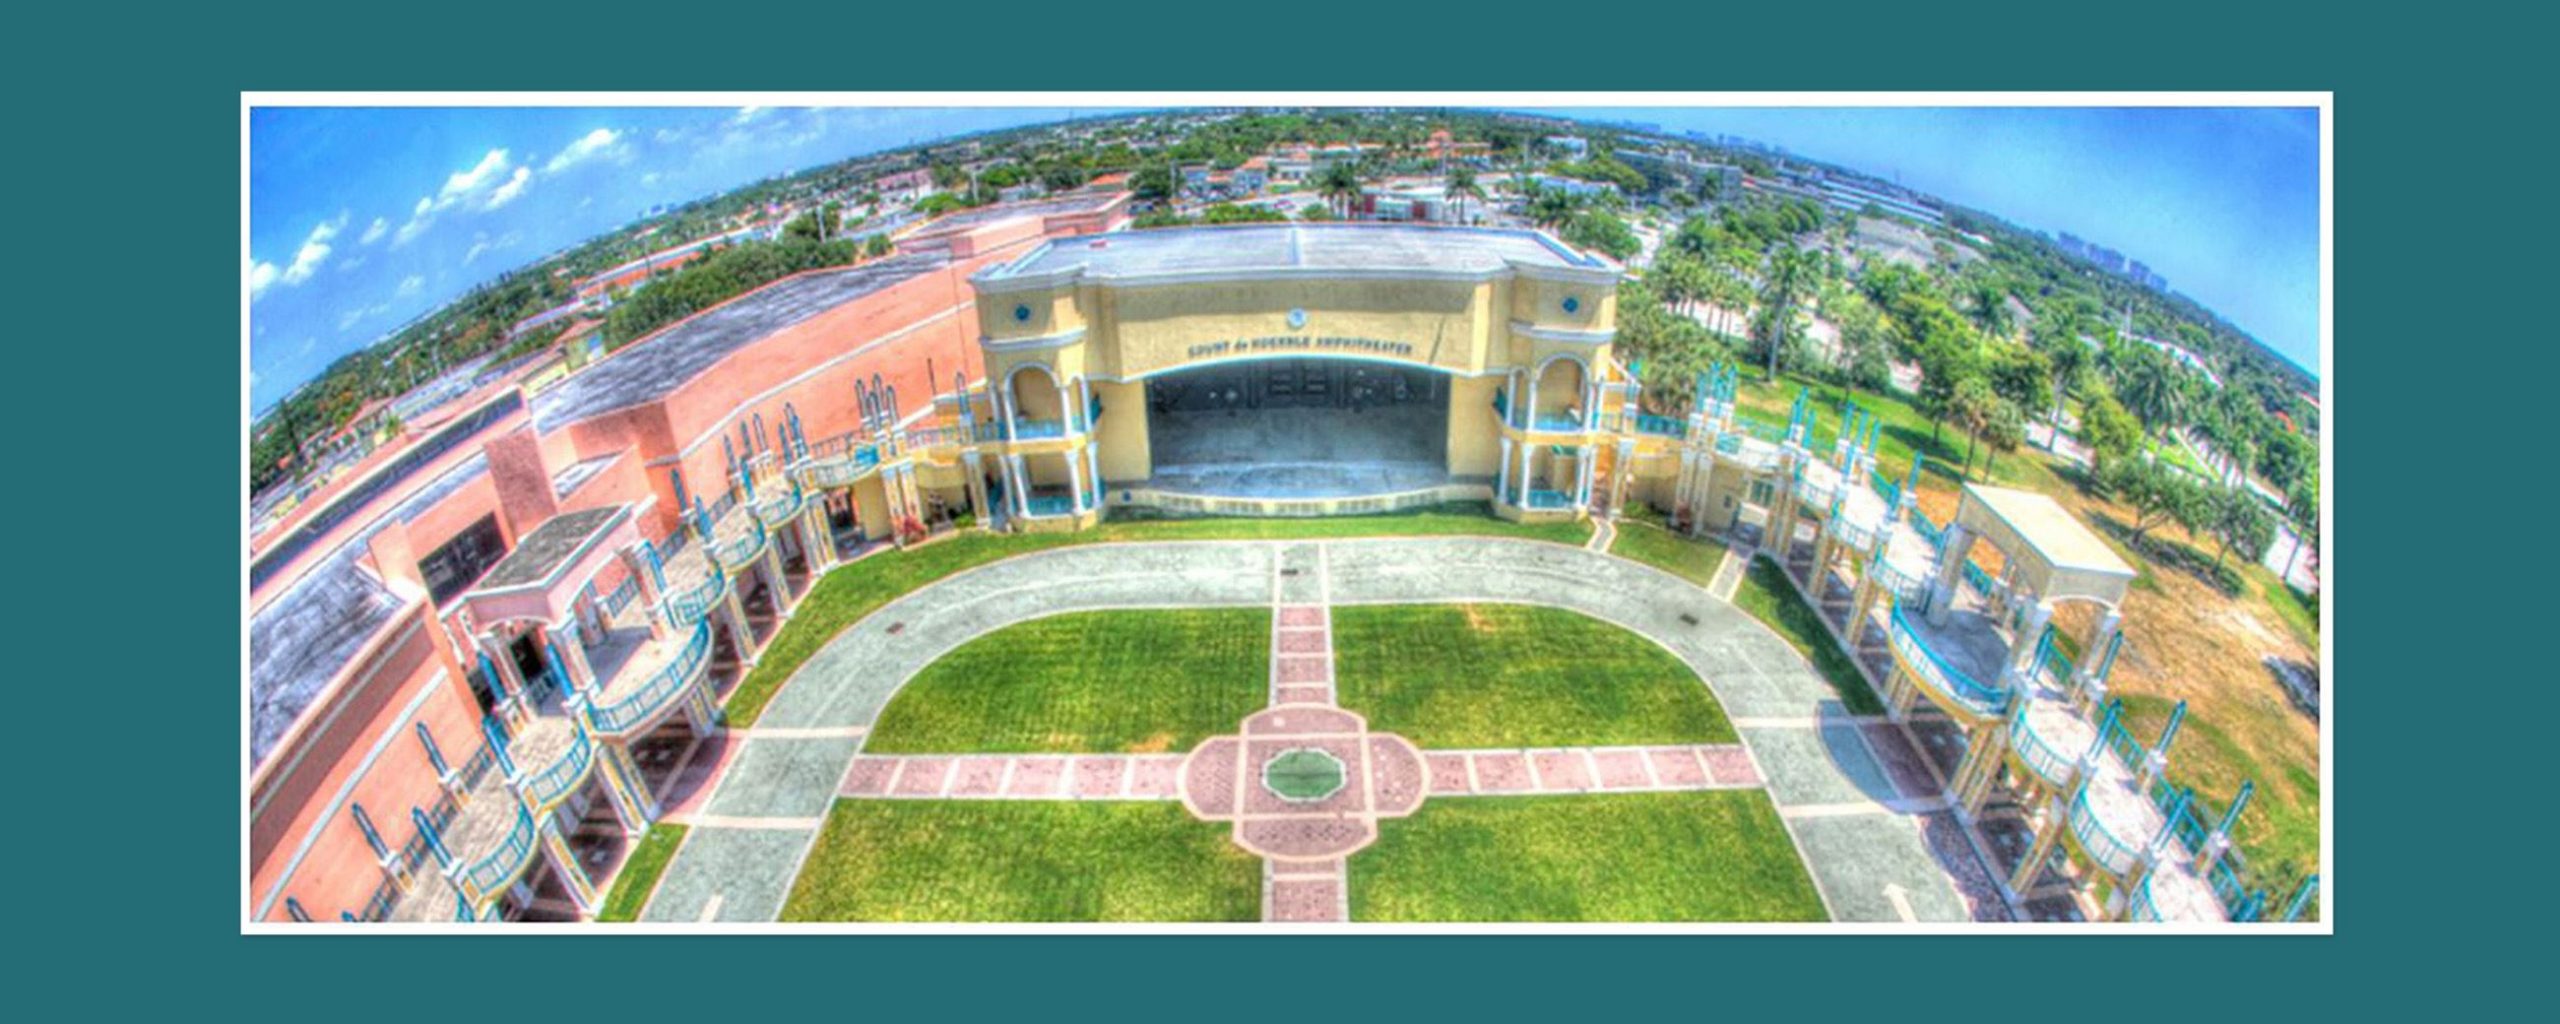 Mizner Park Amphitheater Proposed to Reopen with Socially Distanced